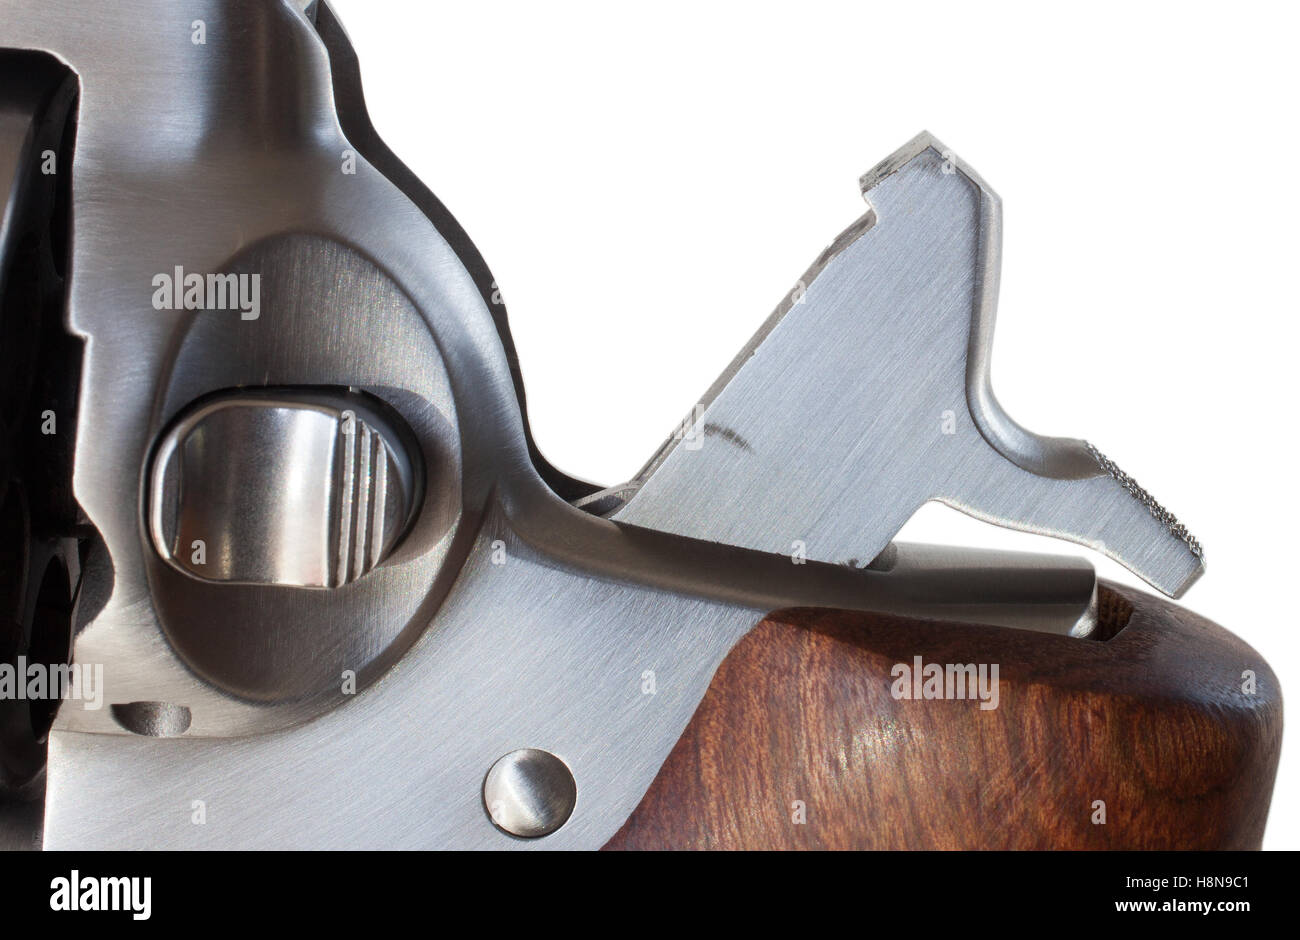 Hammer on a double action revolver back and ready to shoot Stock Photo